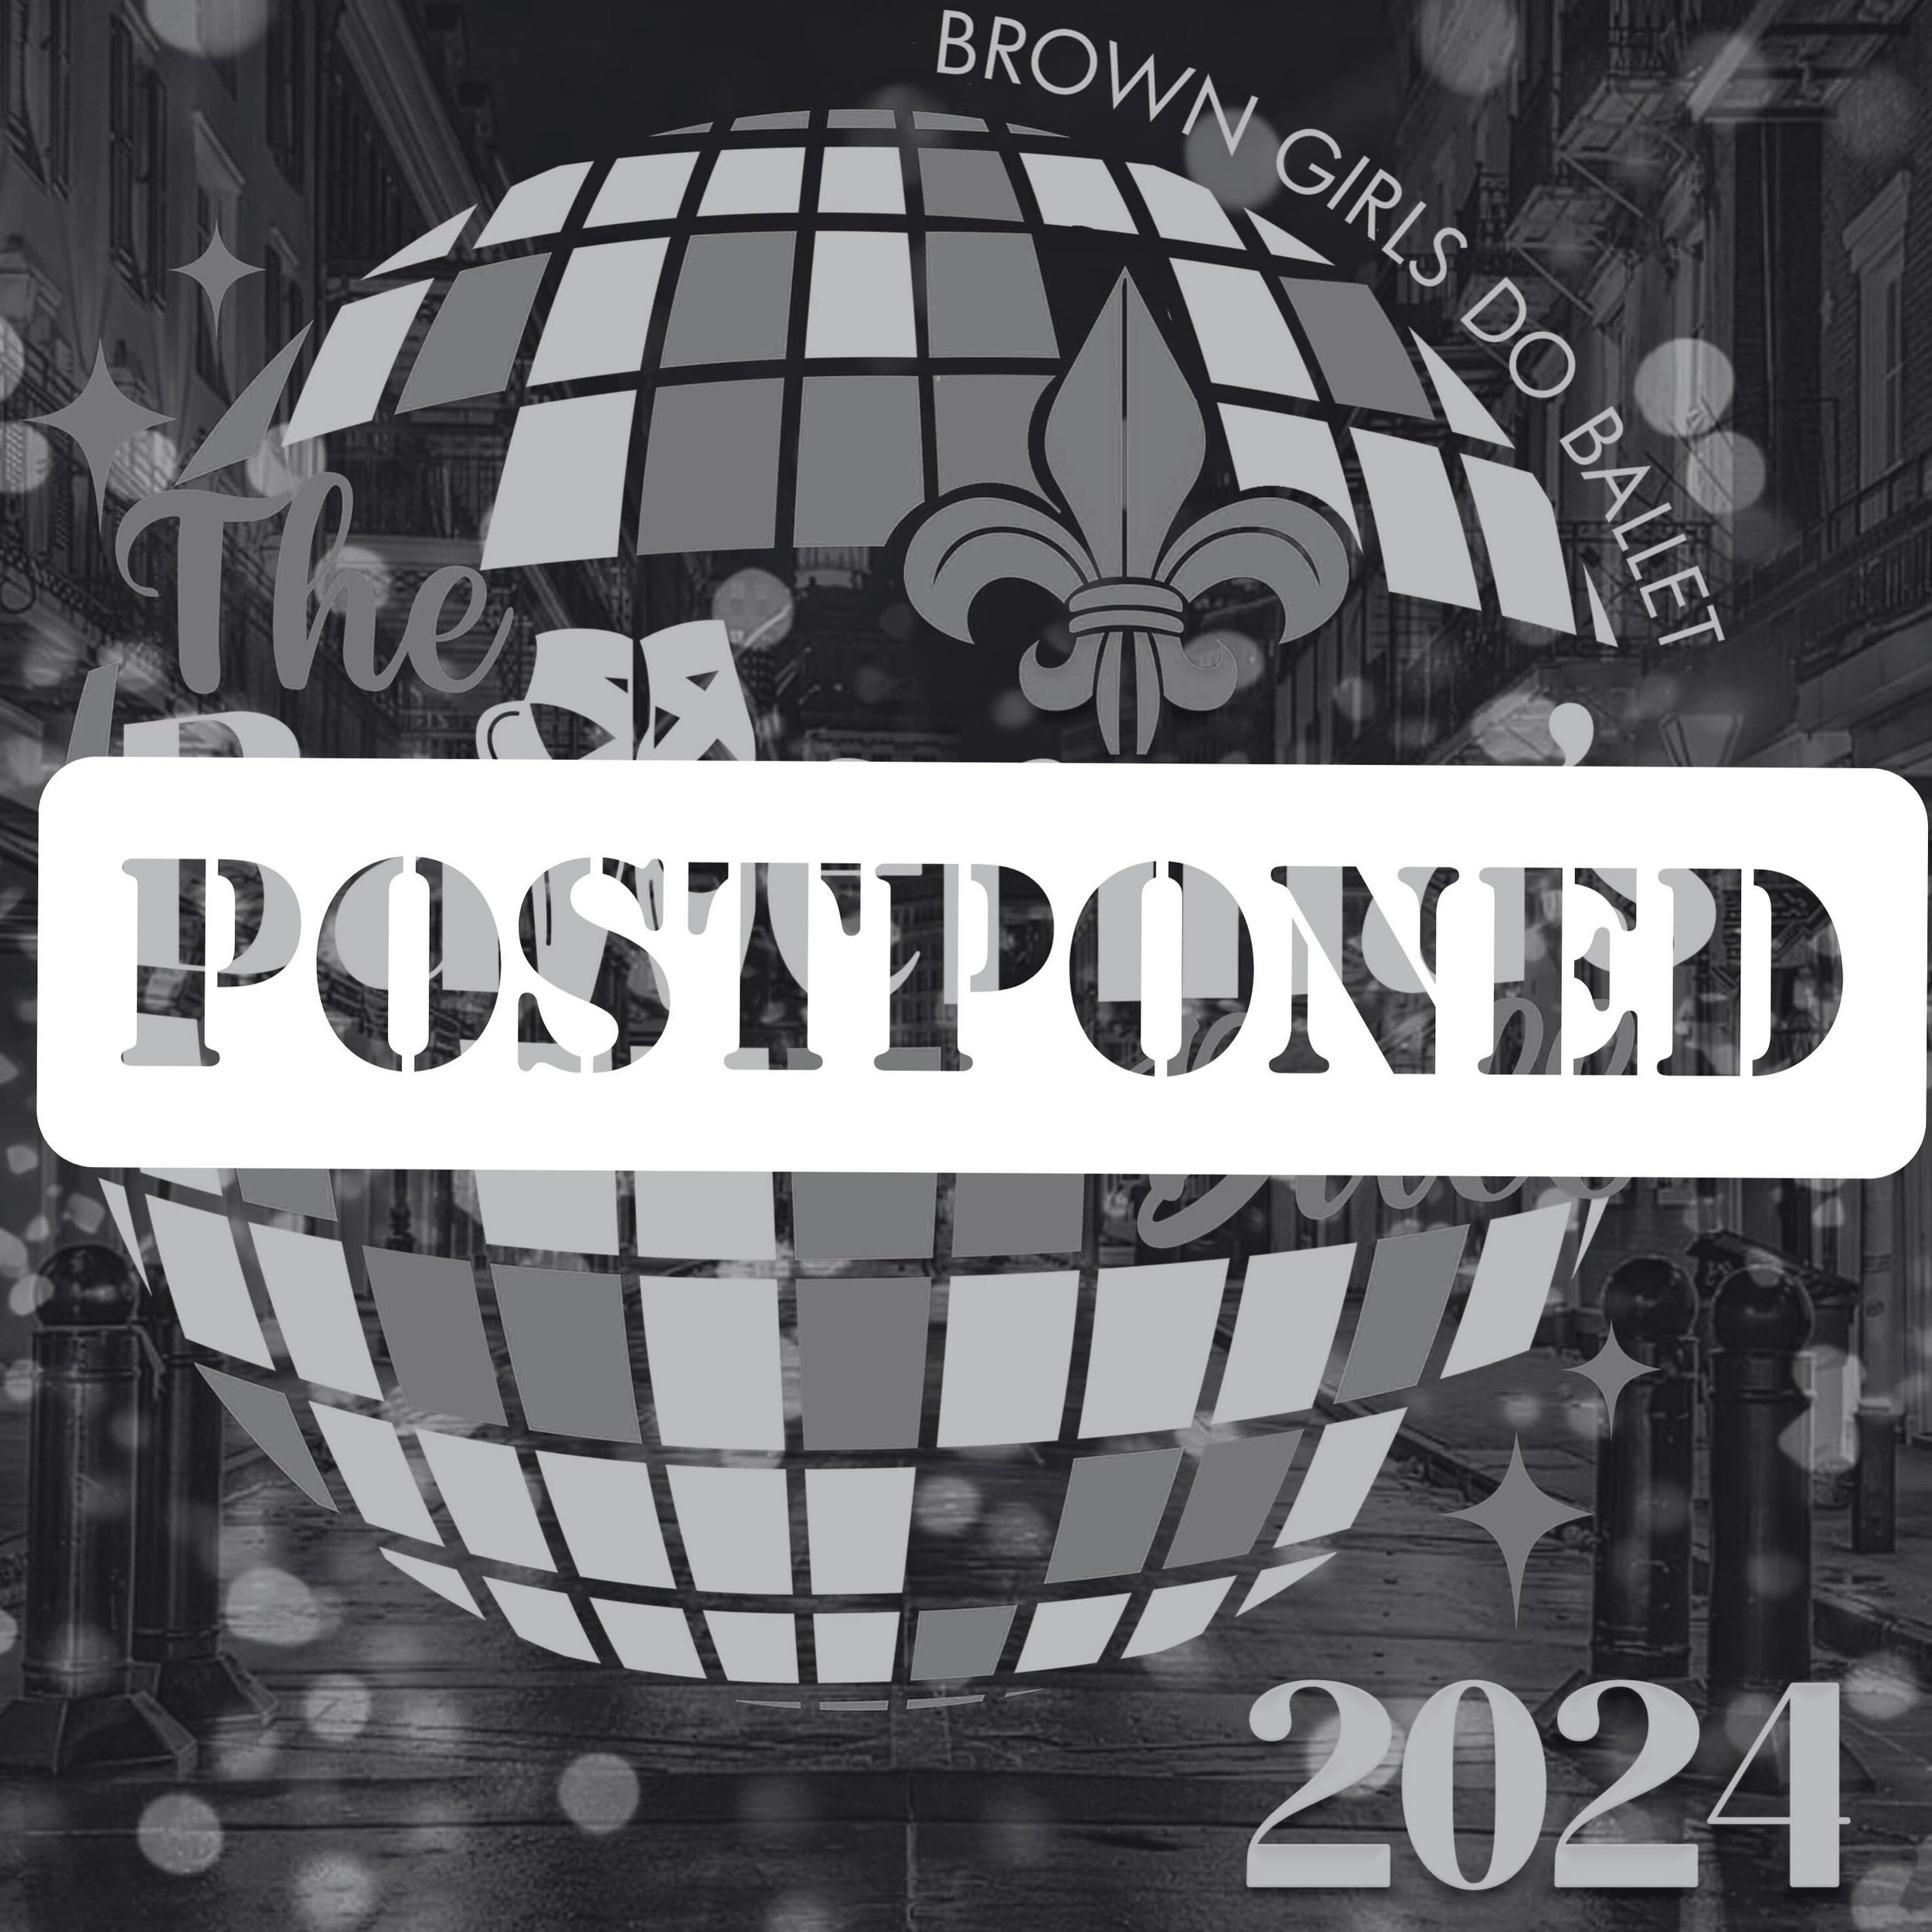 It is&nbsp;with a heavy heart&nbsp;that we&nbsp;announce the postponement of our fundraiser gala, The Ballerina&rsquo;s Ball.&nbsp;Due to unforeseen sponsorship&nbsp;and funding challenges, we&nbsp;are unable to&nbsp;proceed as planned.&nbsp;

First 